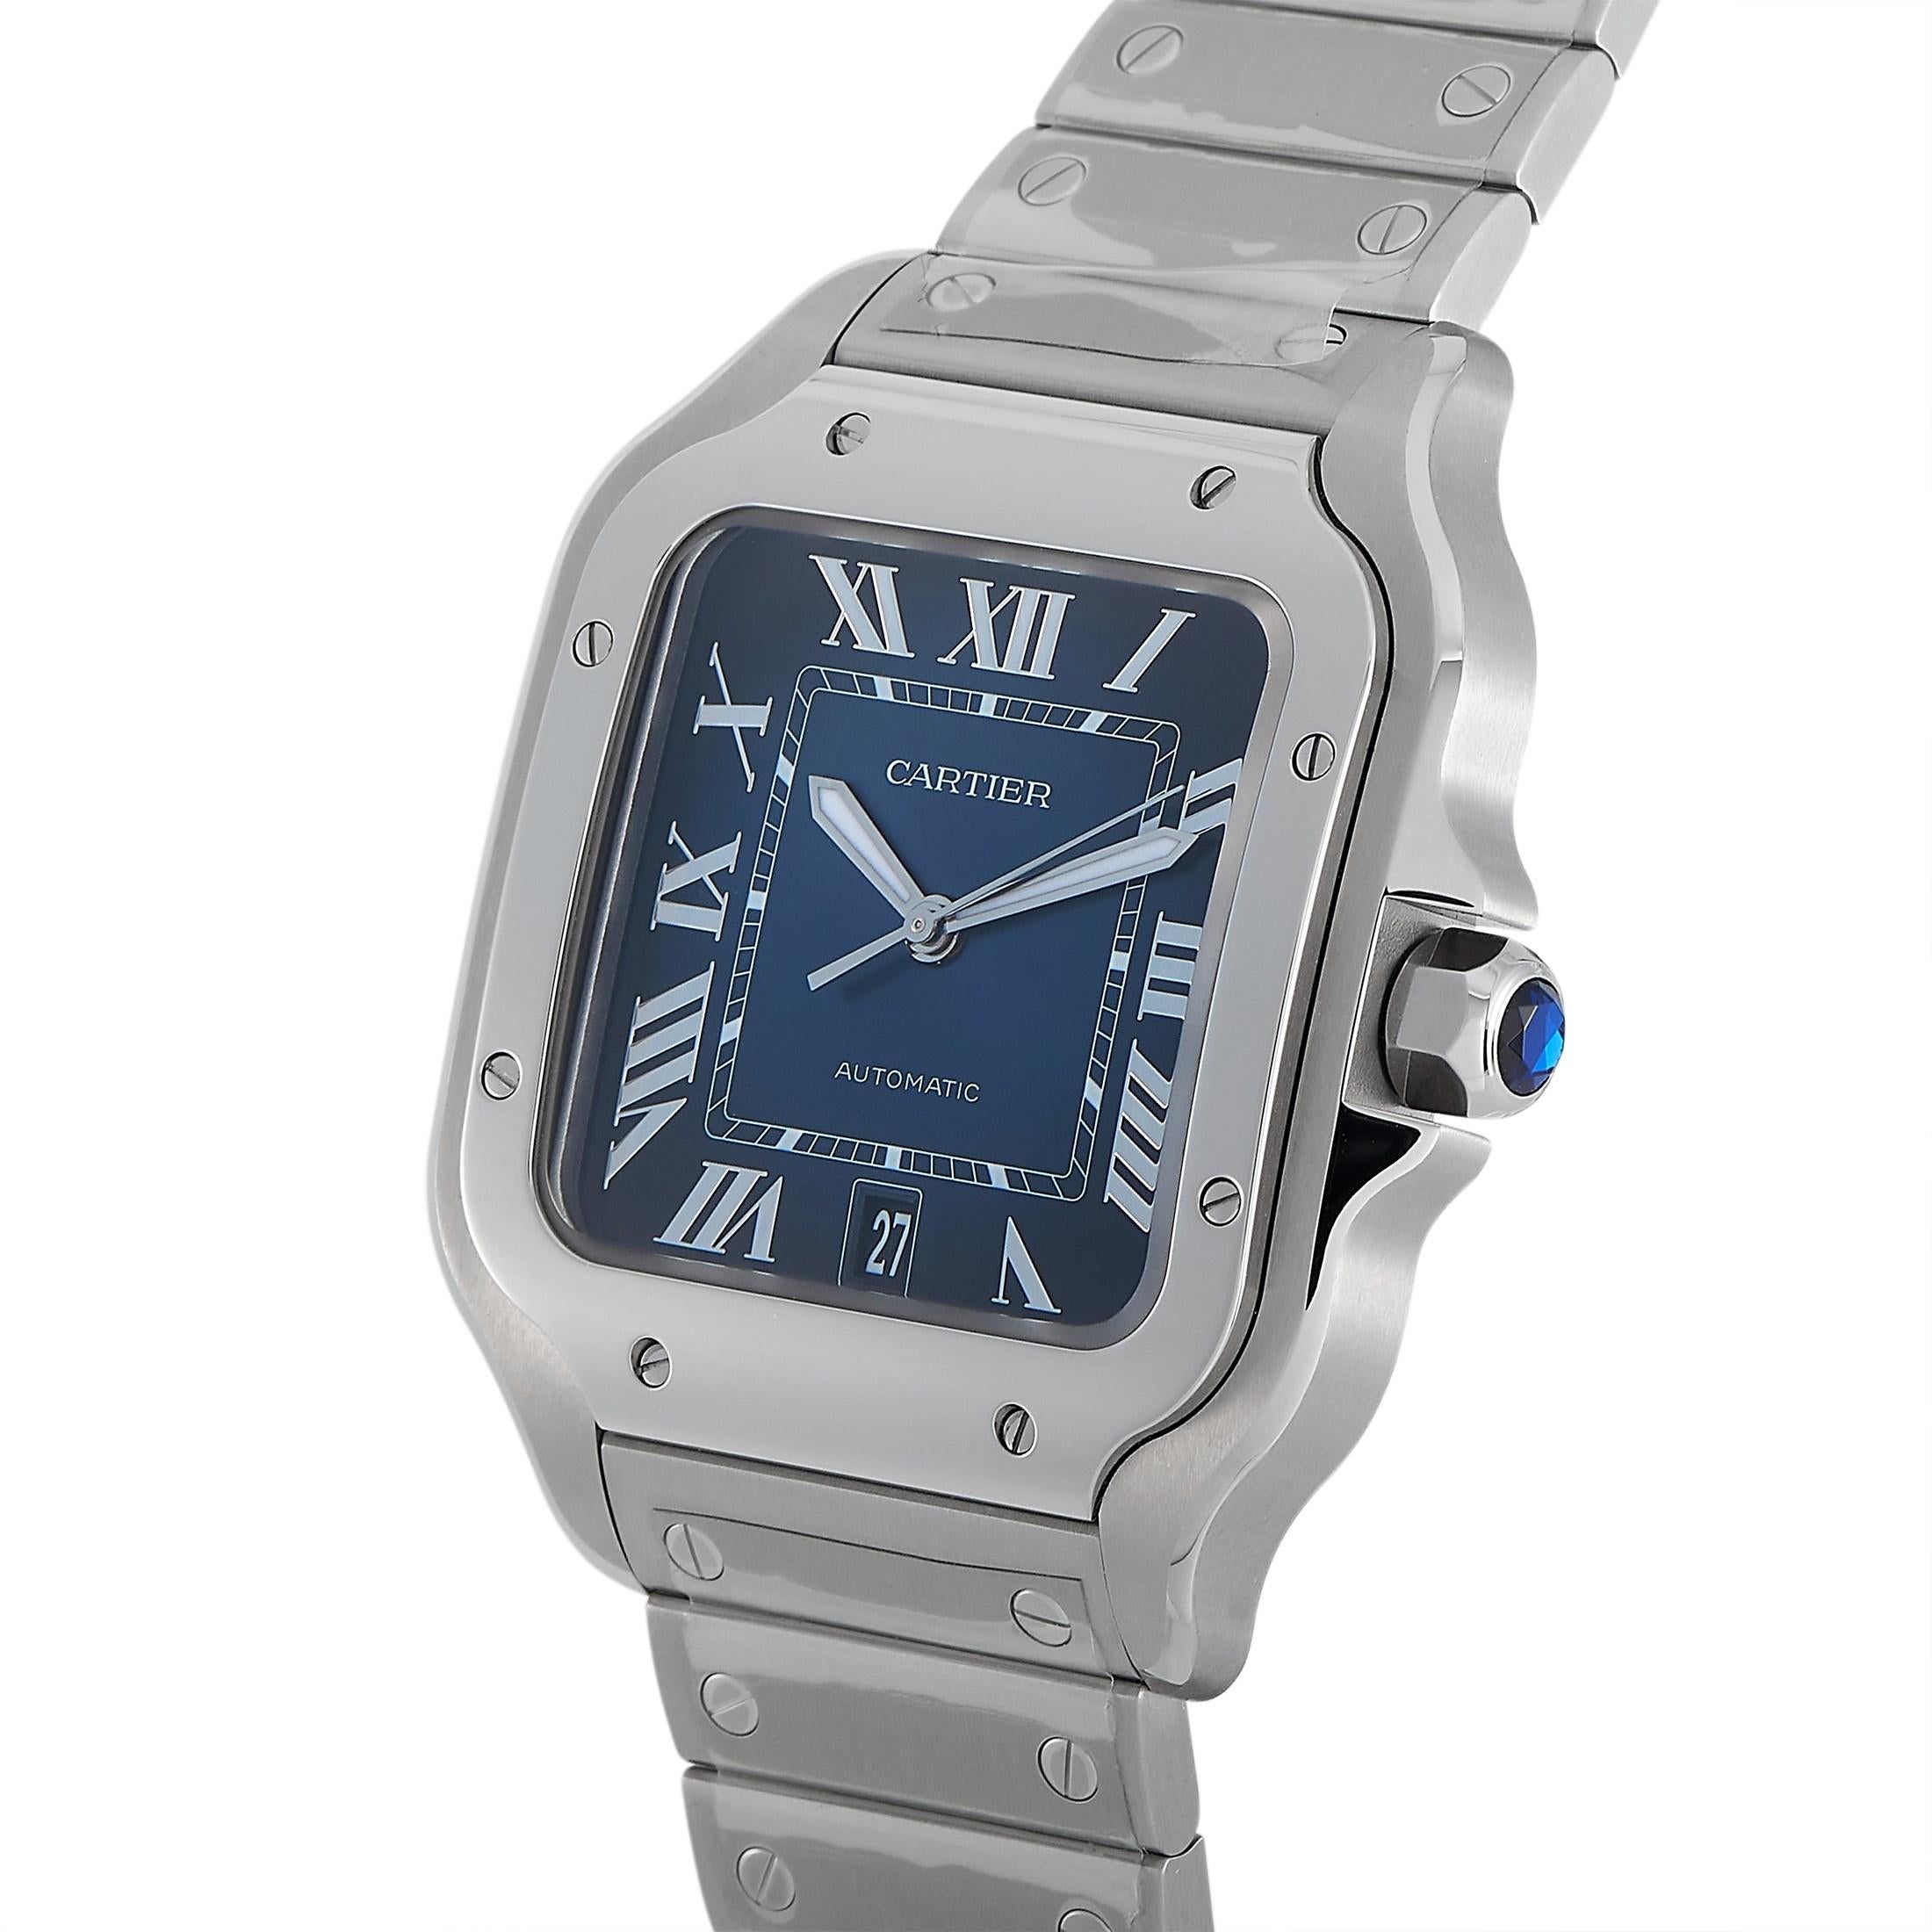 The Cartier Santos Watch, reference number WSSA0030, is the most sophisticated accessory you’ll ever own. 

This impeccable watch includes a bracelet, bezel, and 39.8 mm x 47.5 mm case crafted from stainless steel. On the brilliant blue dial,